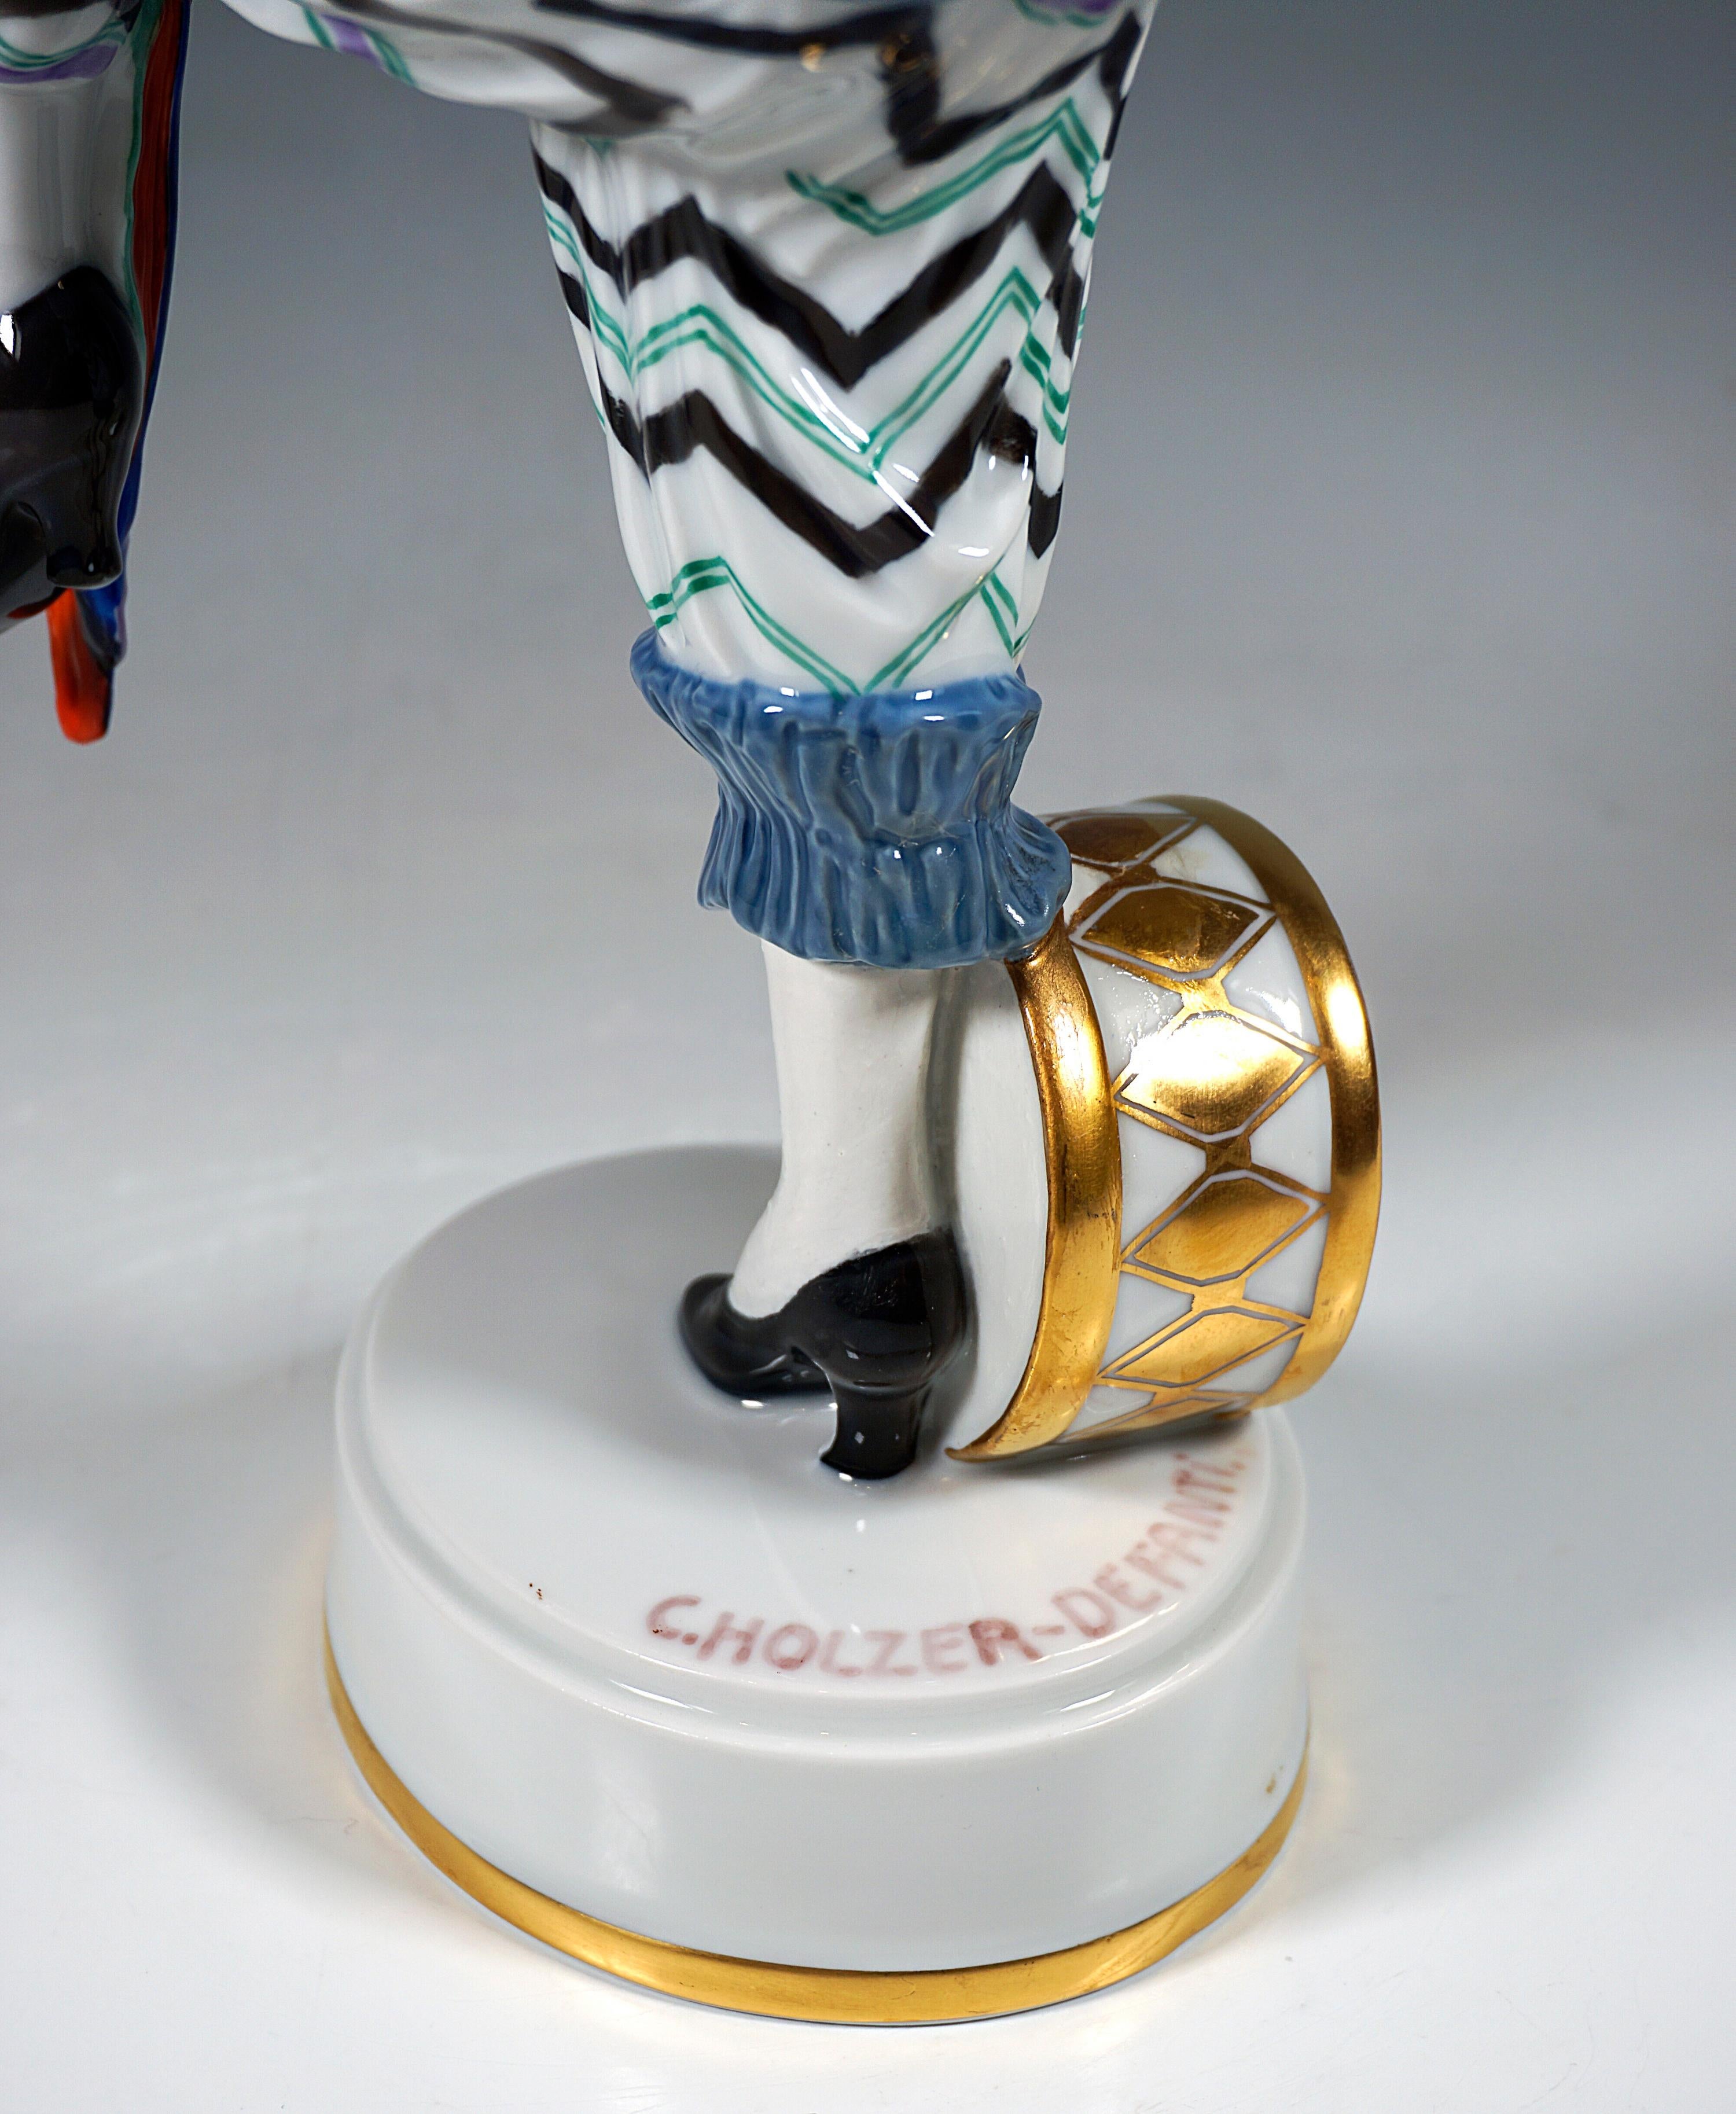 Early 20th Century Art Déco Porcelain Figurine 'Merry March', C. Holzer-Defanti, Rosenthal Germany For Sale